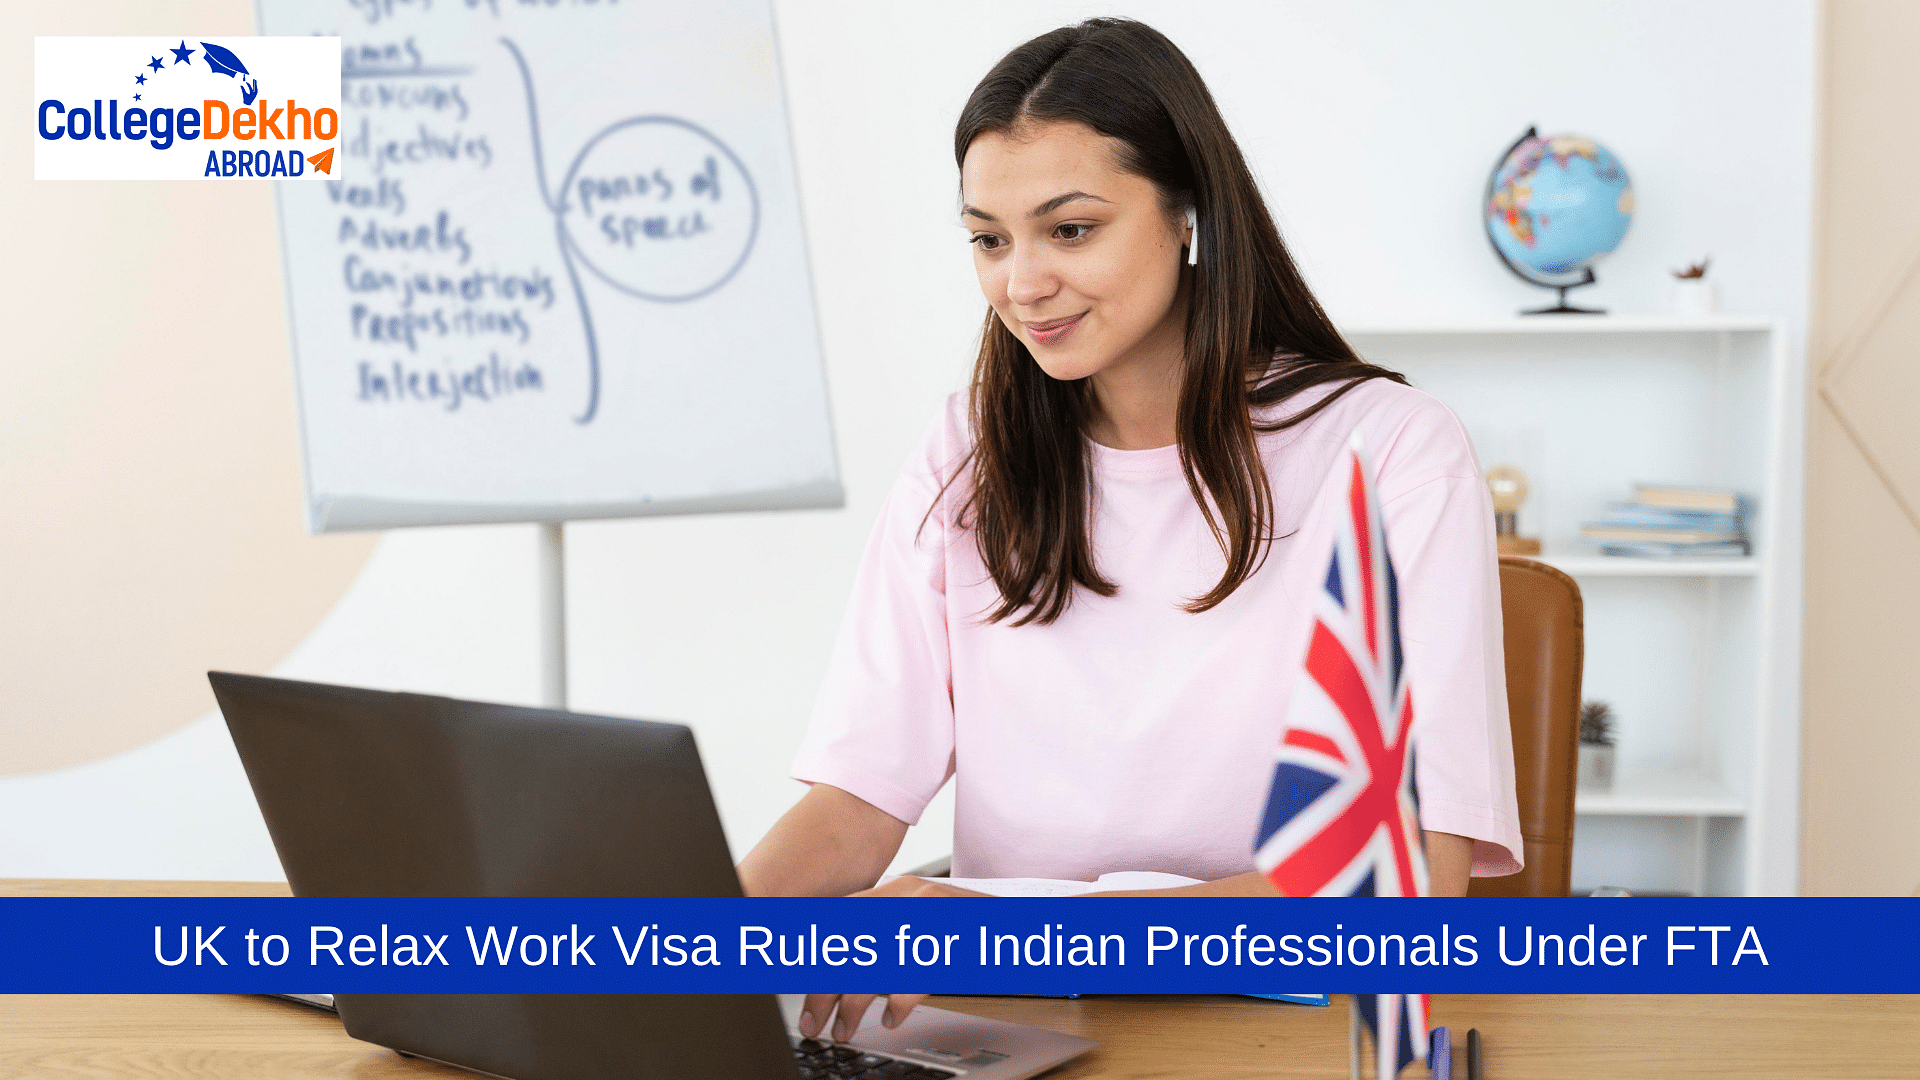 UK to Relax Work Visa Rules for Indian Professionals Under FTA